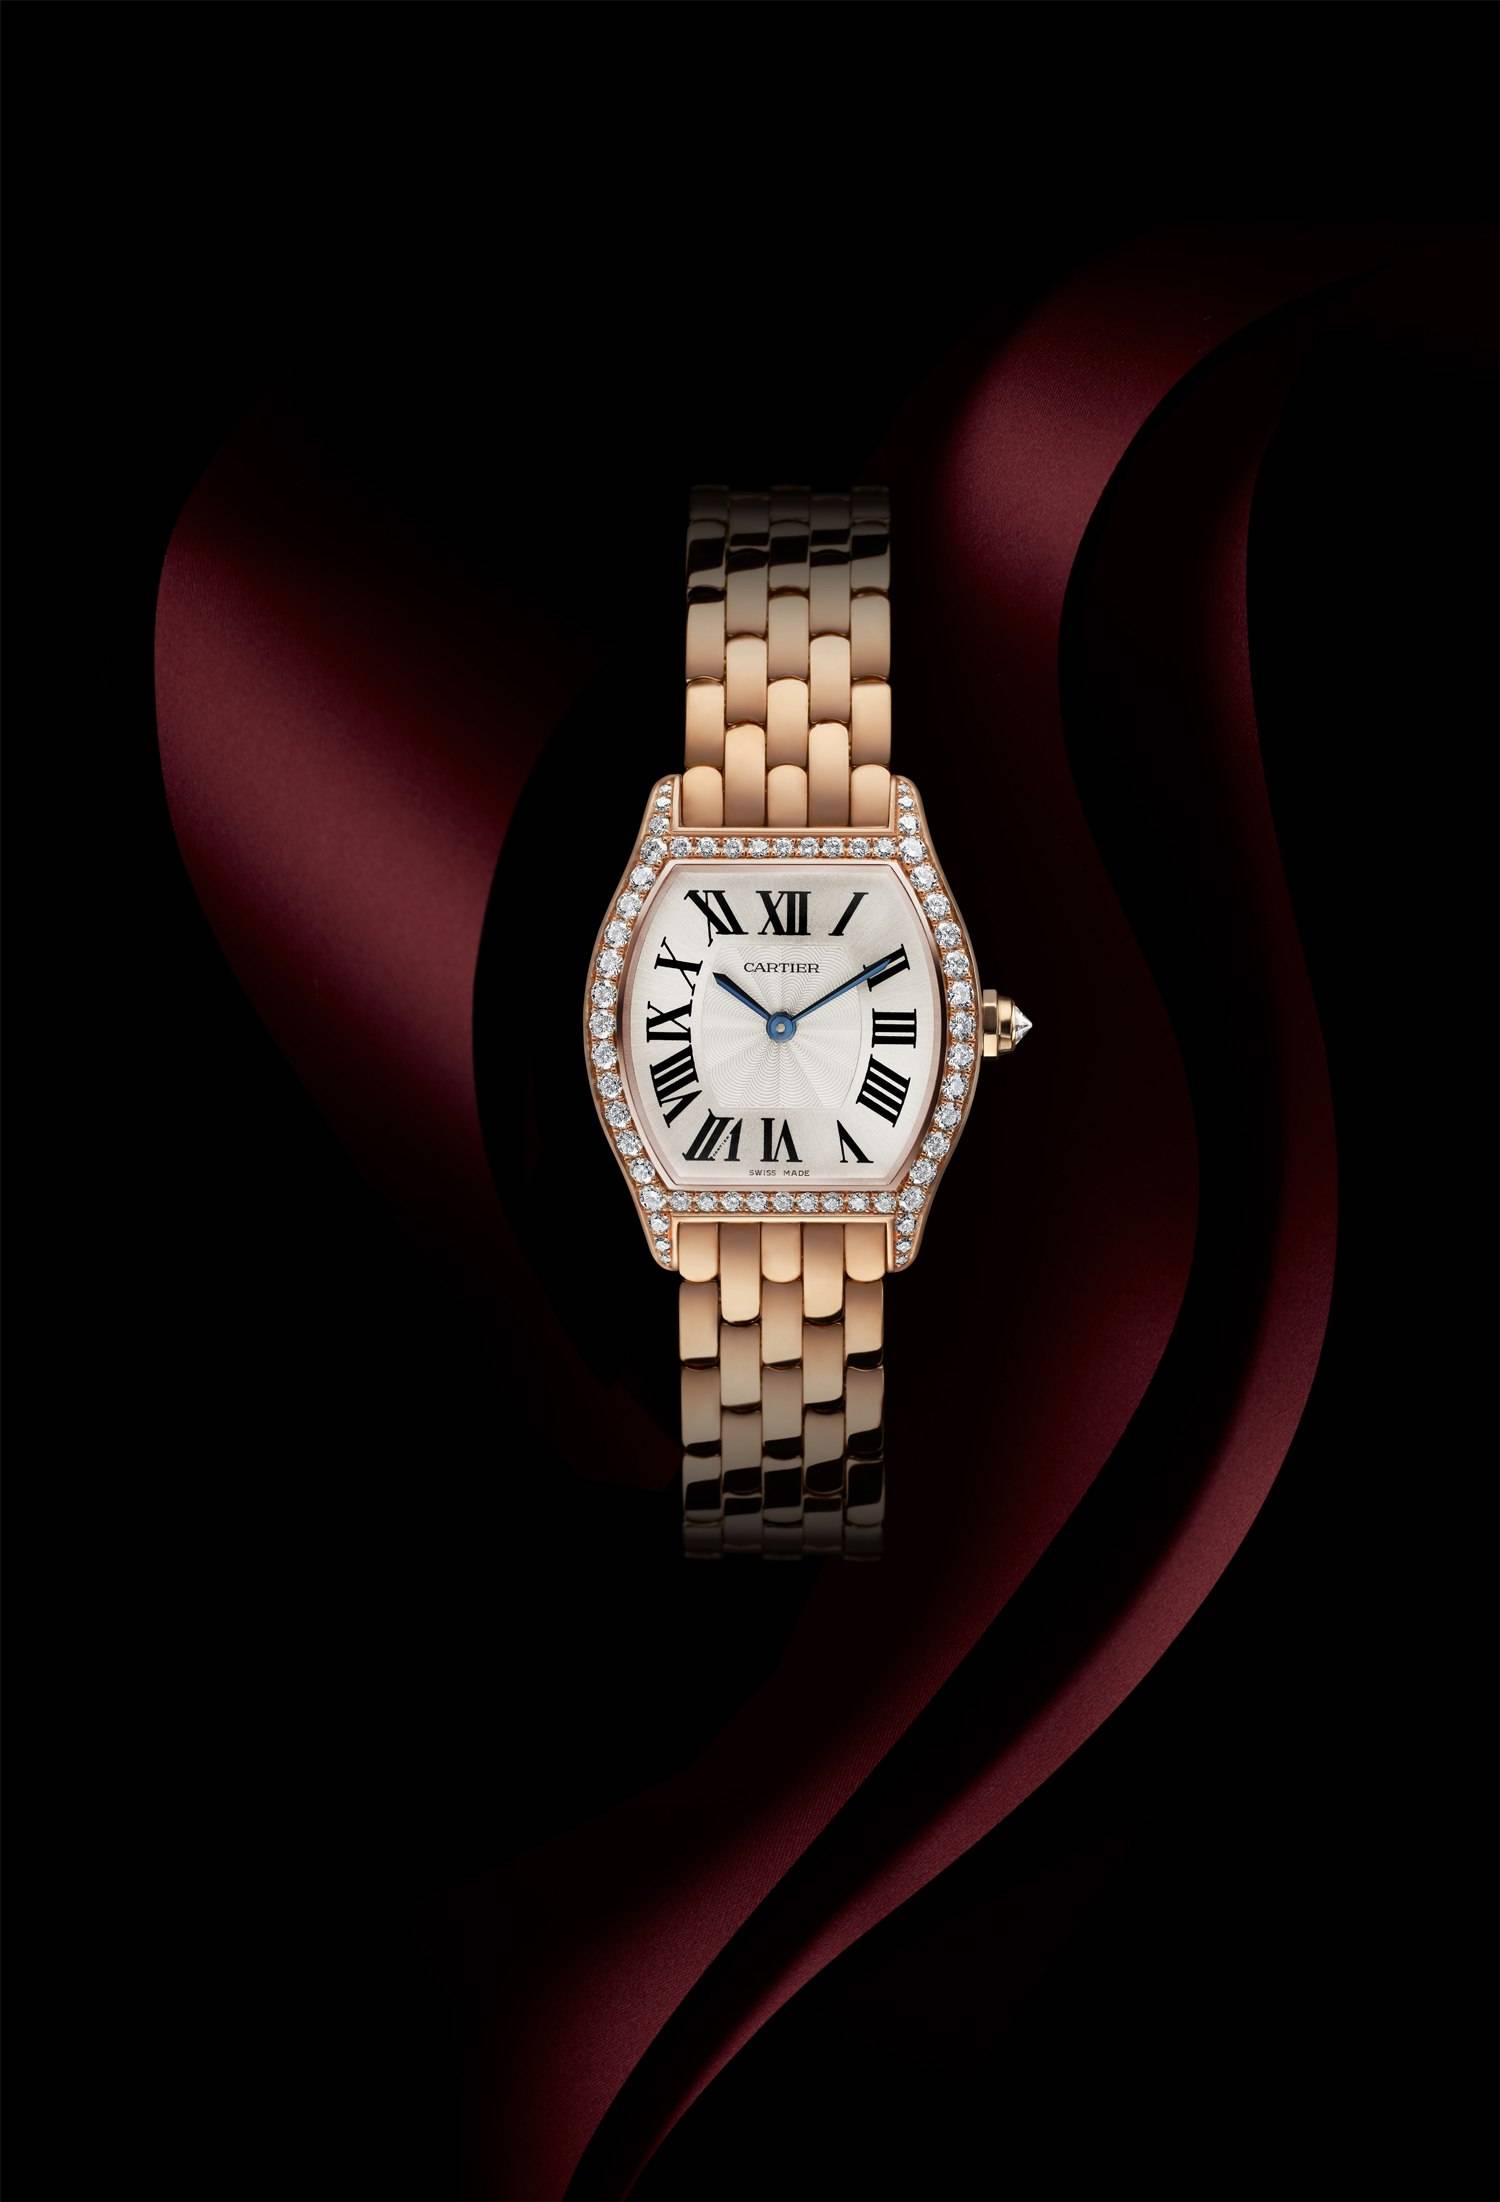 Cartier Set to Relaunch the Tortue Watch at SIHH 2014